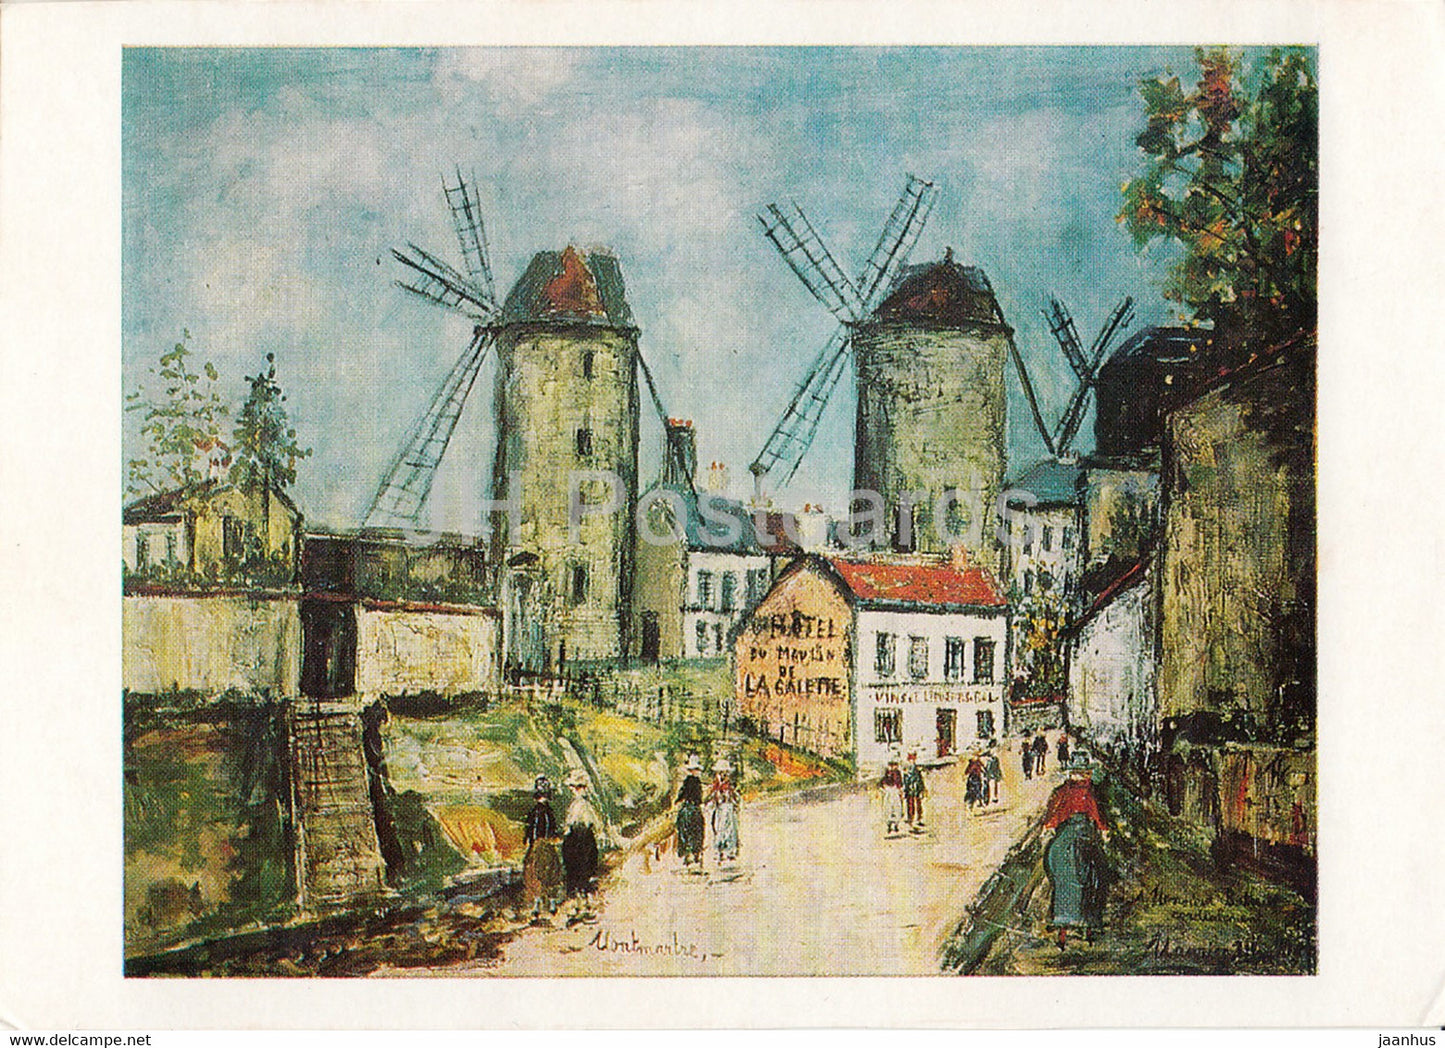 painting by Maurice Utrillo - Muhlen im Wind - windmill - French art - 1971 - Germany - unused - JH Postcards